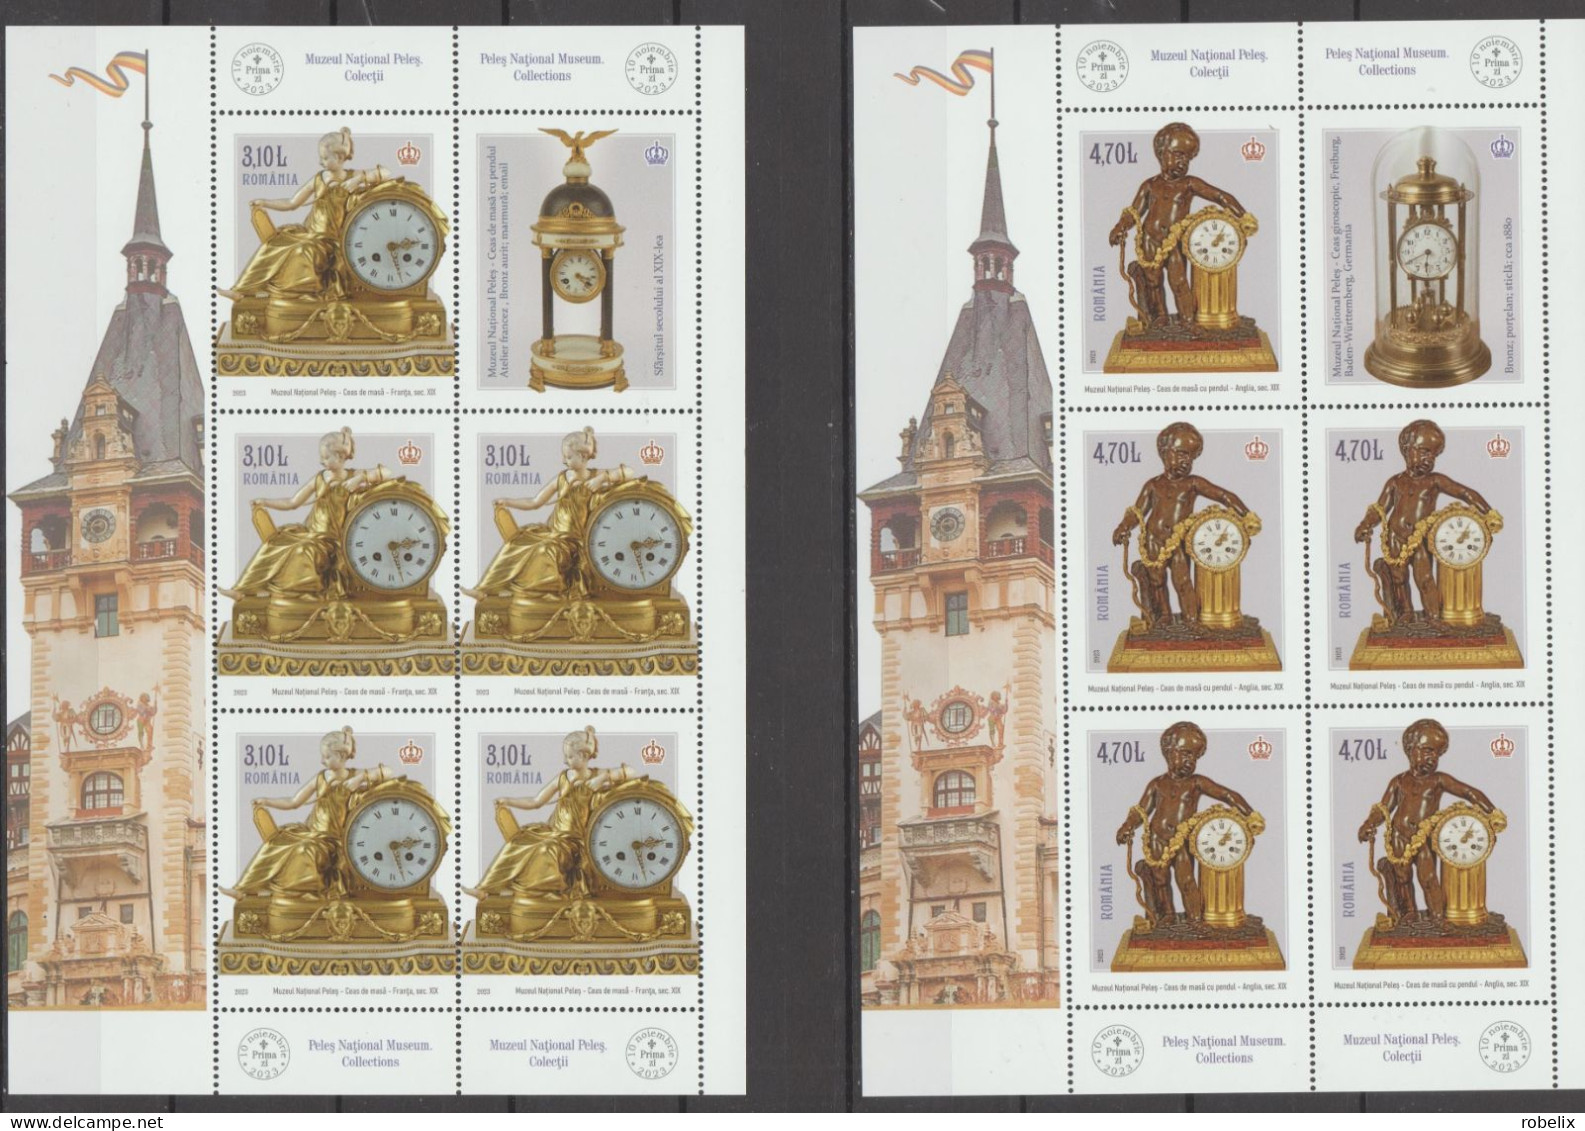 ROMANIA 2023  PELEȘ NATIONAL MUSEUM -COLLECTIONS - CLOCKS -  MiniSheet Of 5 Stamps+1label+iillustrated Border MNH** - Clocks